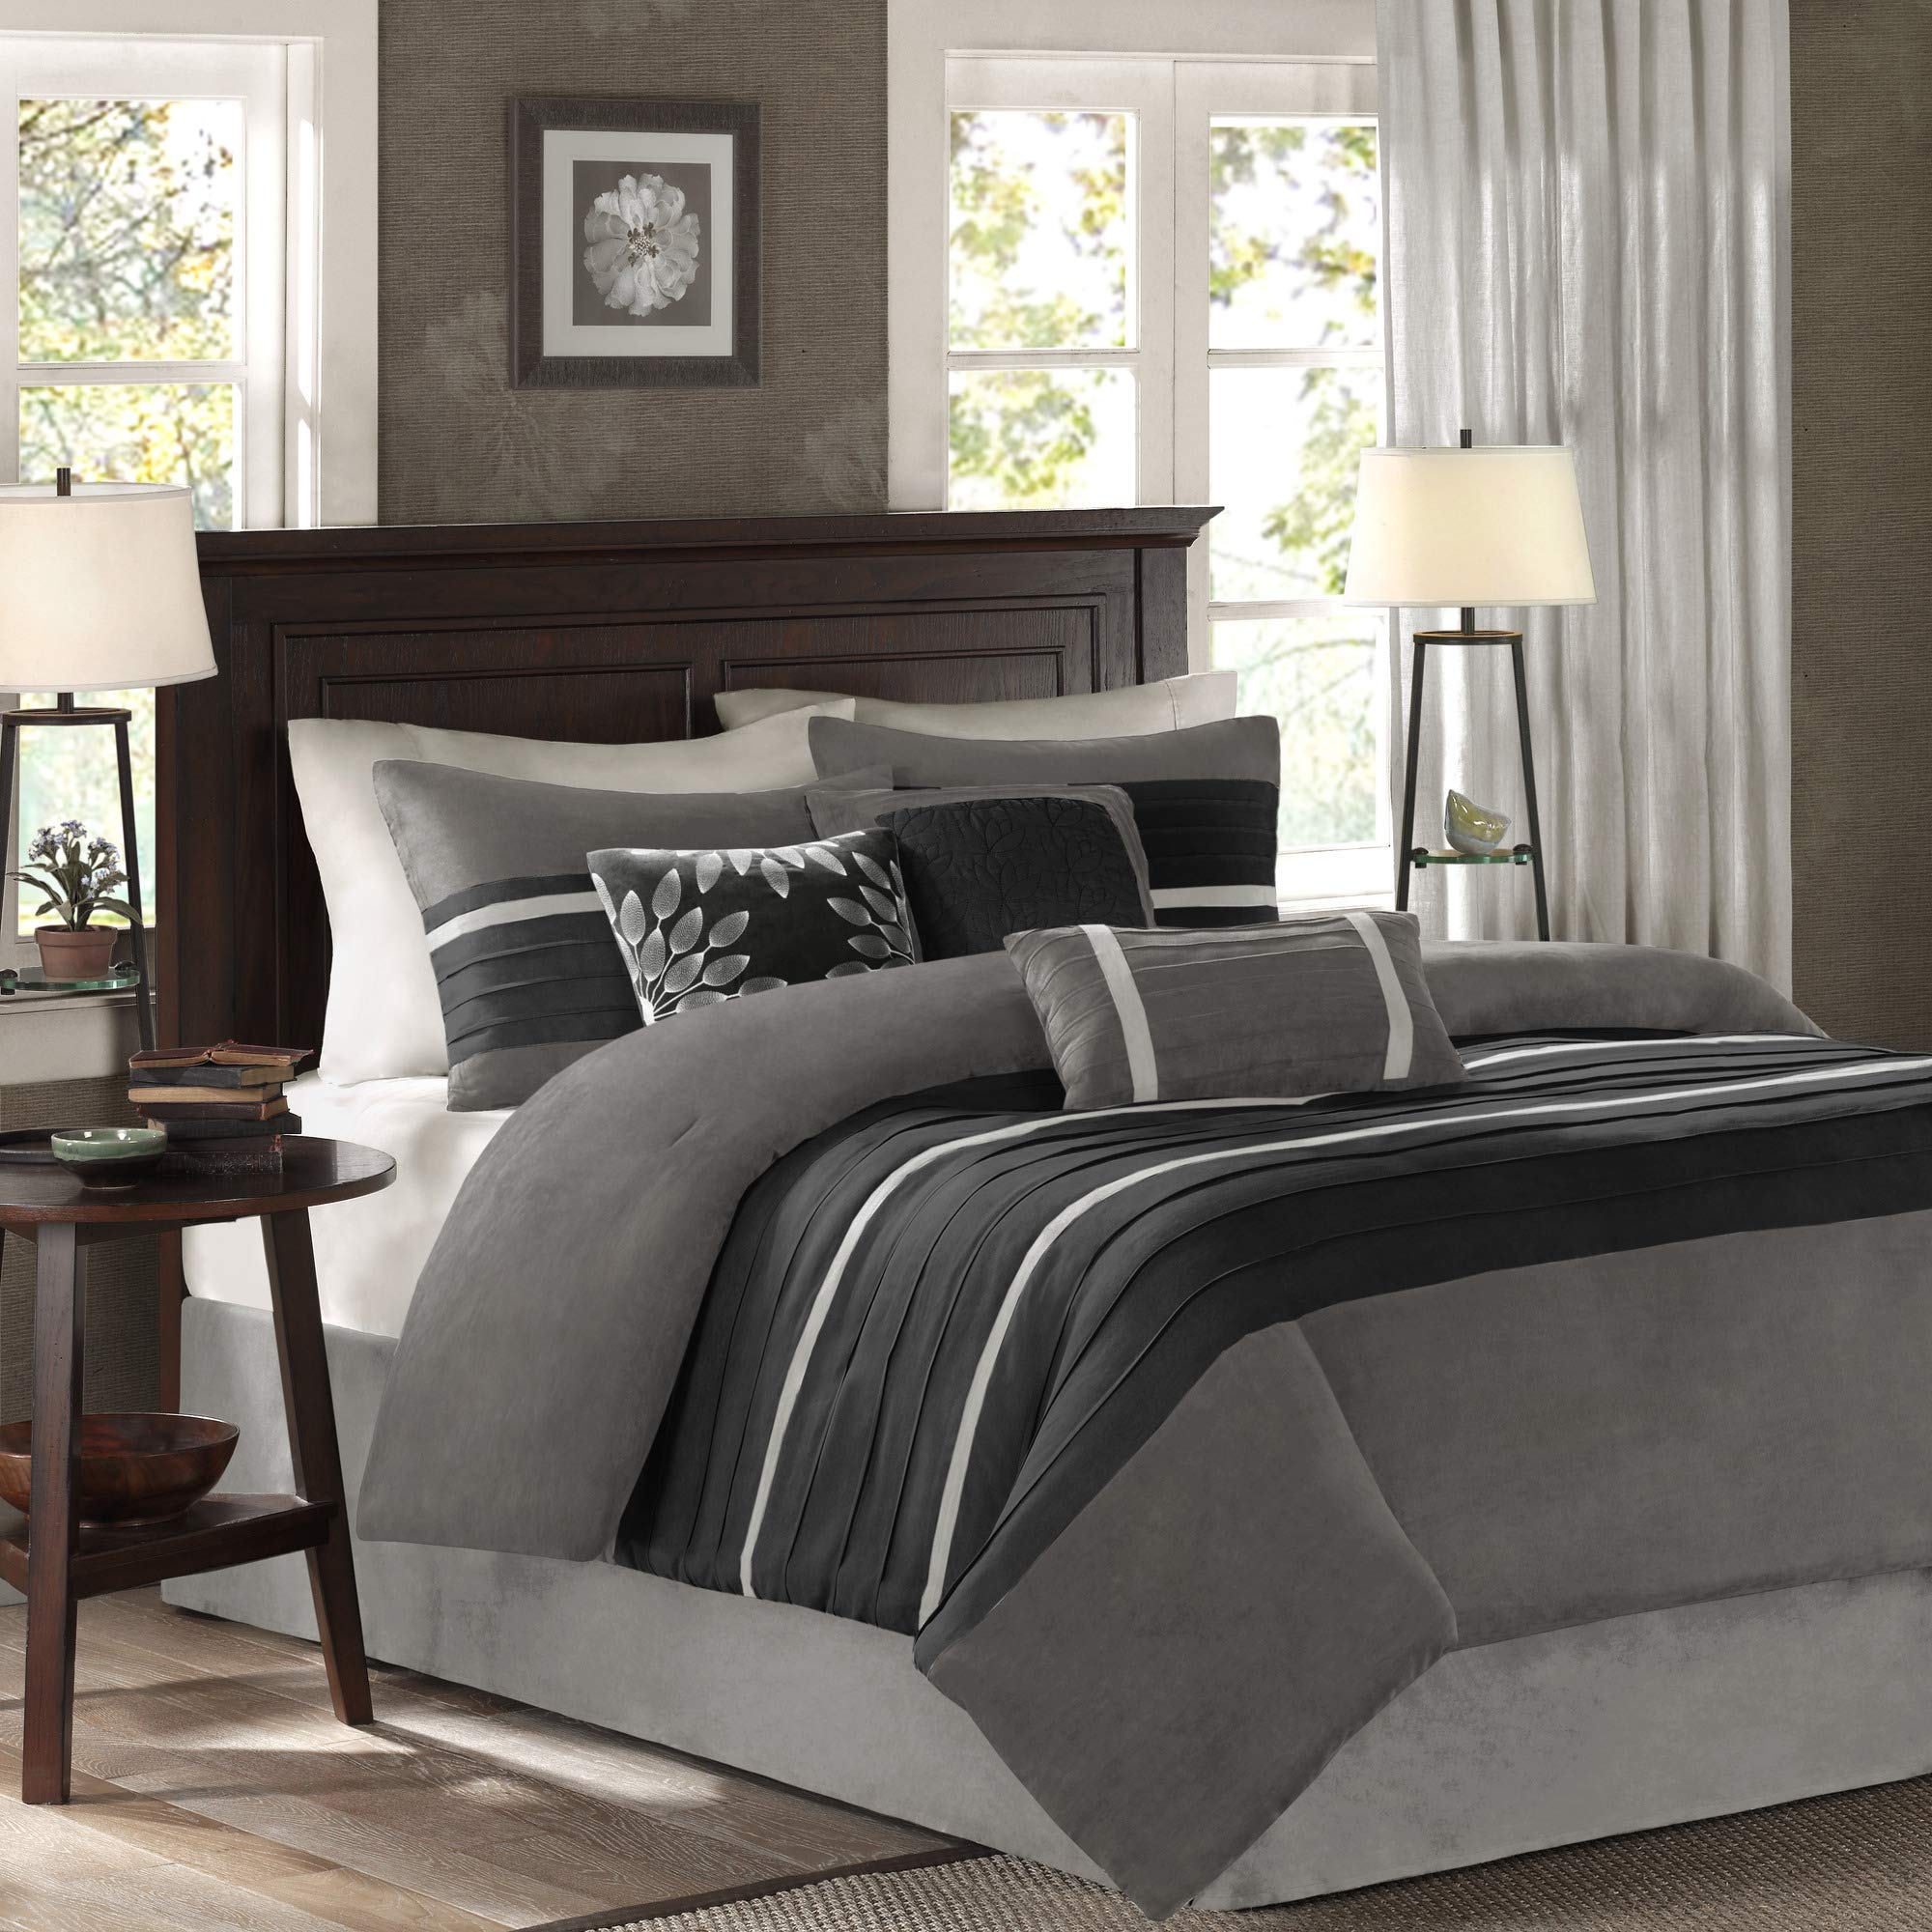 Book Cover Madison Park - Palmer 7 Piece Comforter Set - Black and Gray - King - Pieced Microsuede - Includes 1 Comforter, 3 Decorative Pillows, 1 Bed Skirt, 2 Shams